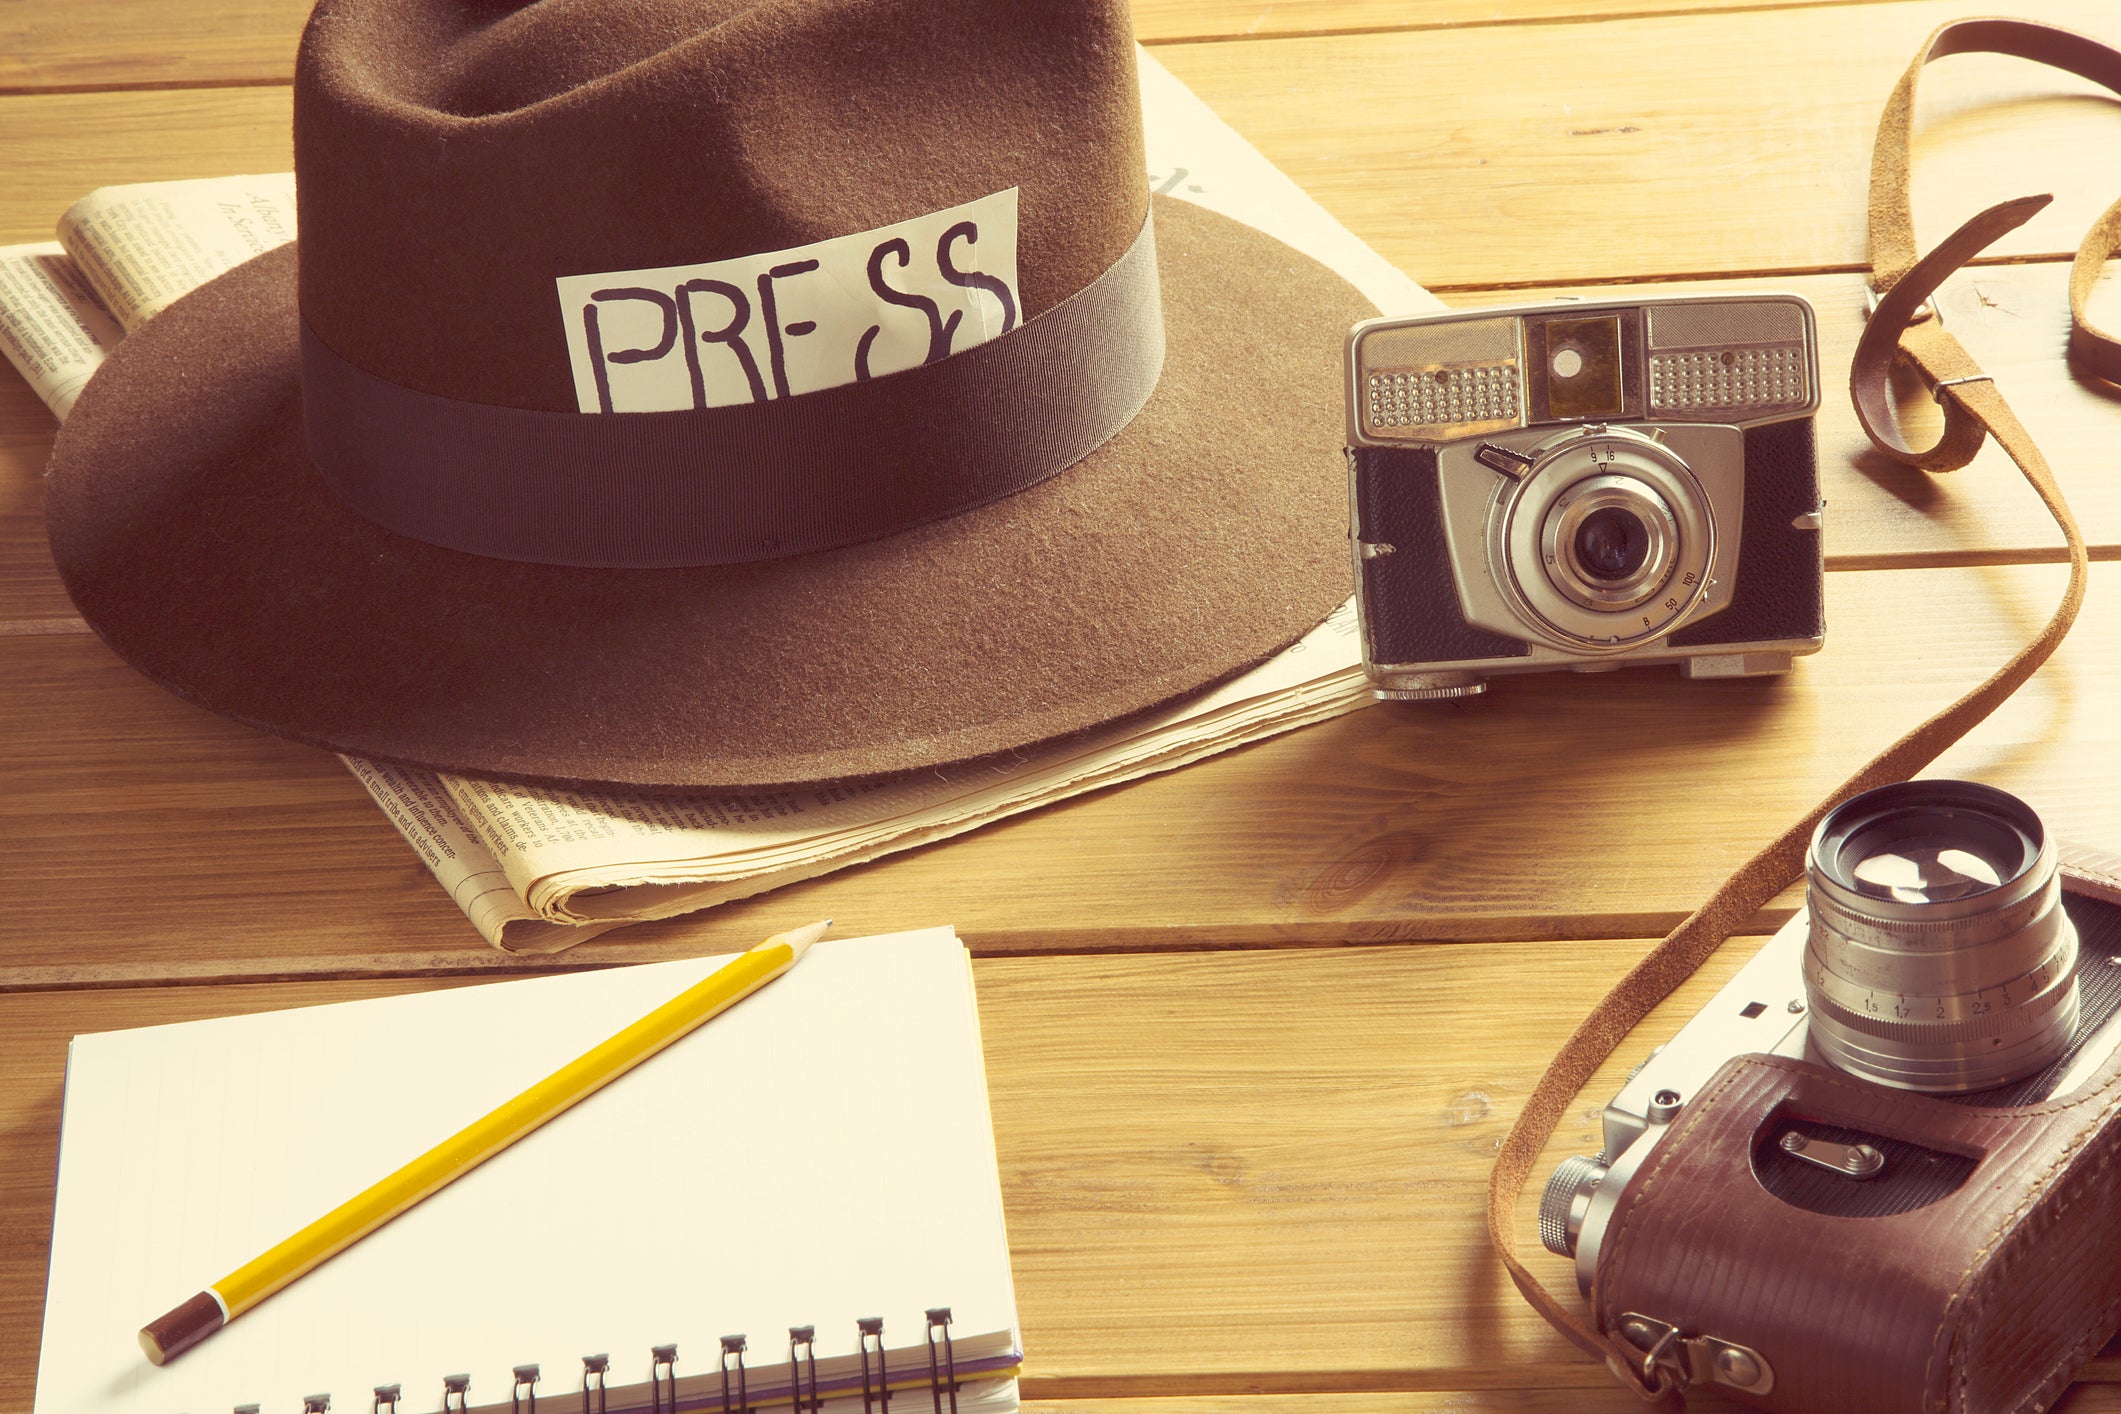 Journalism tools on a table, including a camera, notebook, and press hat.